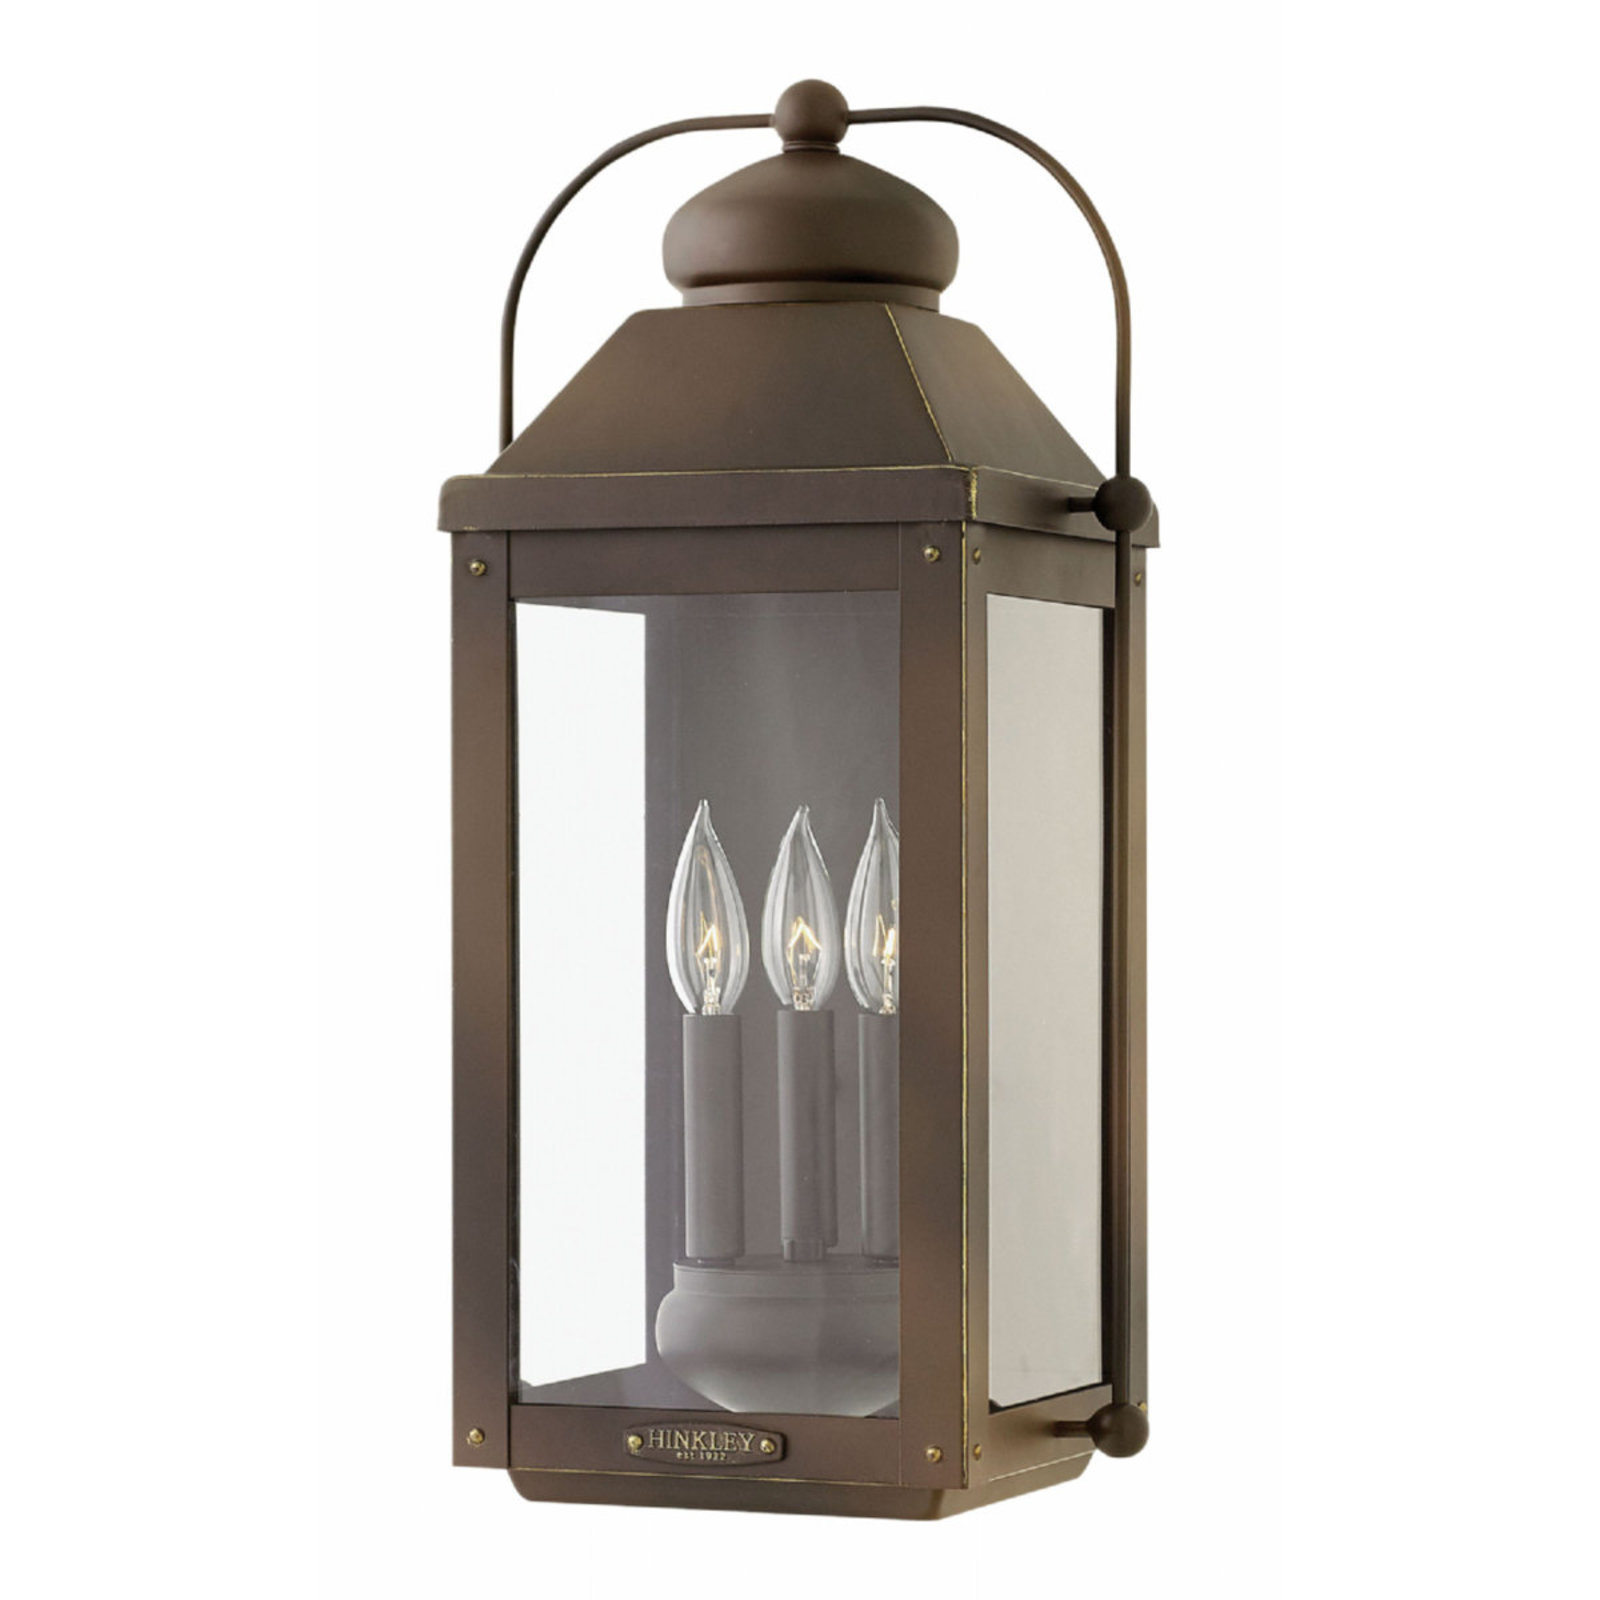 Nostalgic Arched Carriage Outdoor Light - Large - Shades of Light